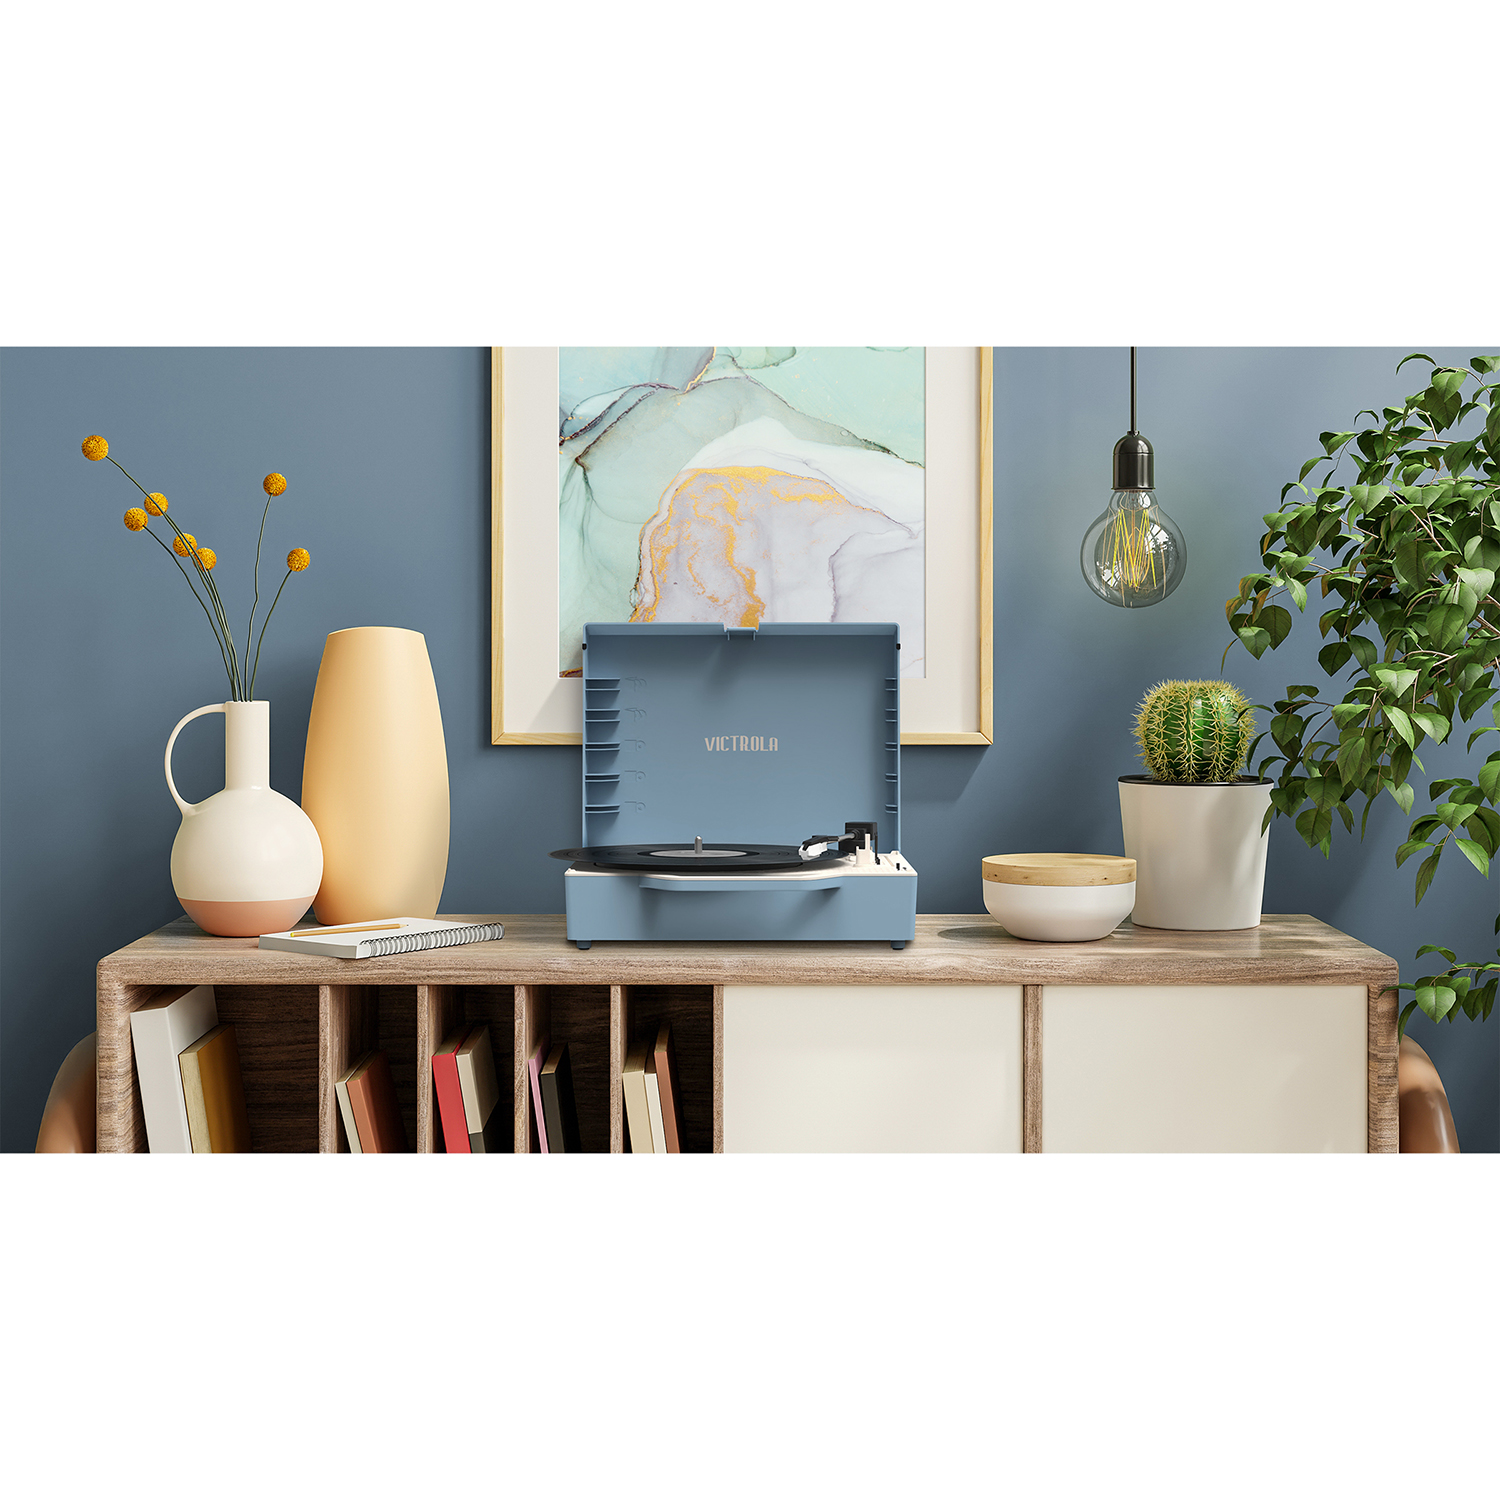 Victrola Re-Spin Sustainable Bluetooth Suitcase Record Player- Light Blue | Walmart Exclusive - image 10 of 20